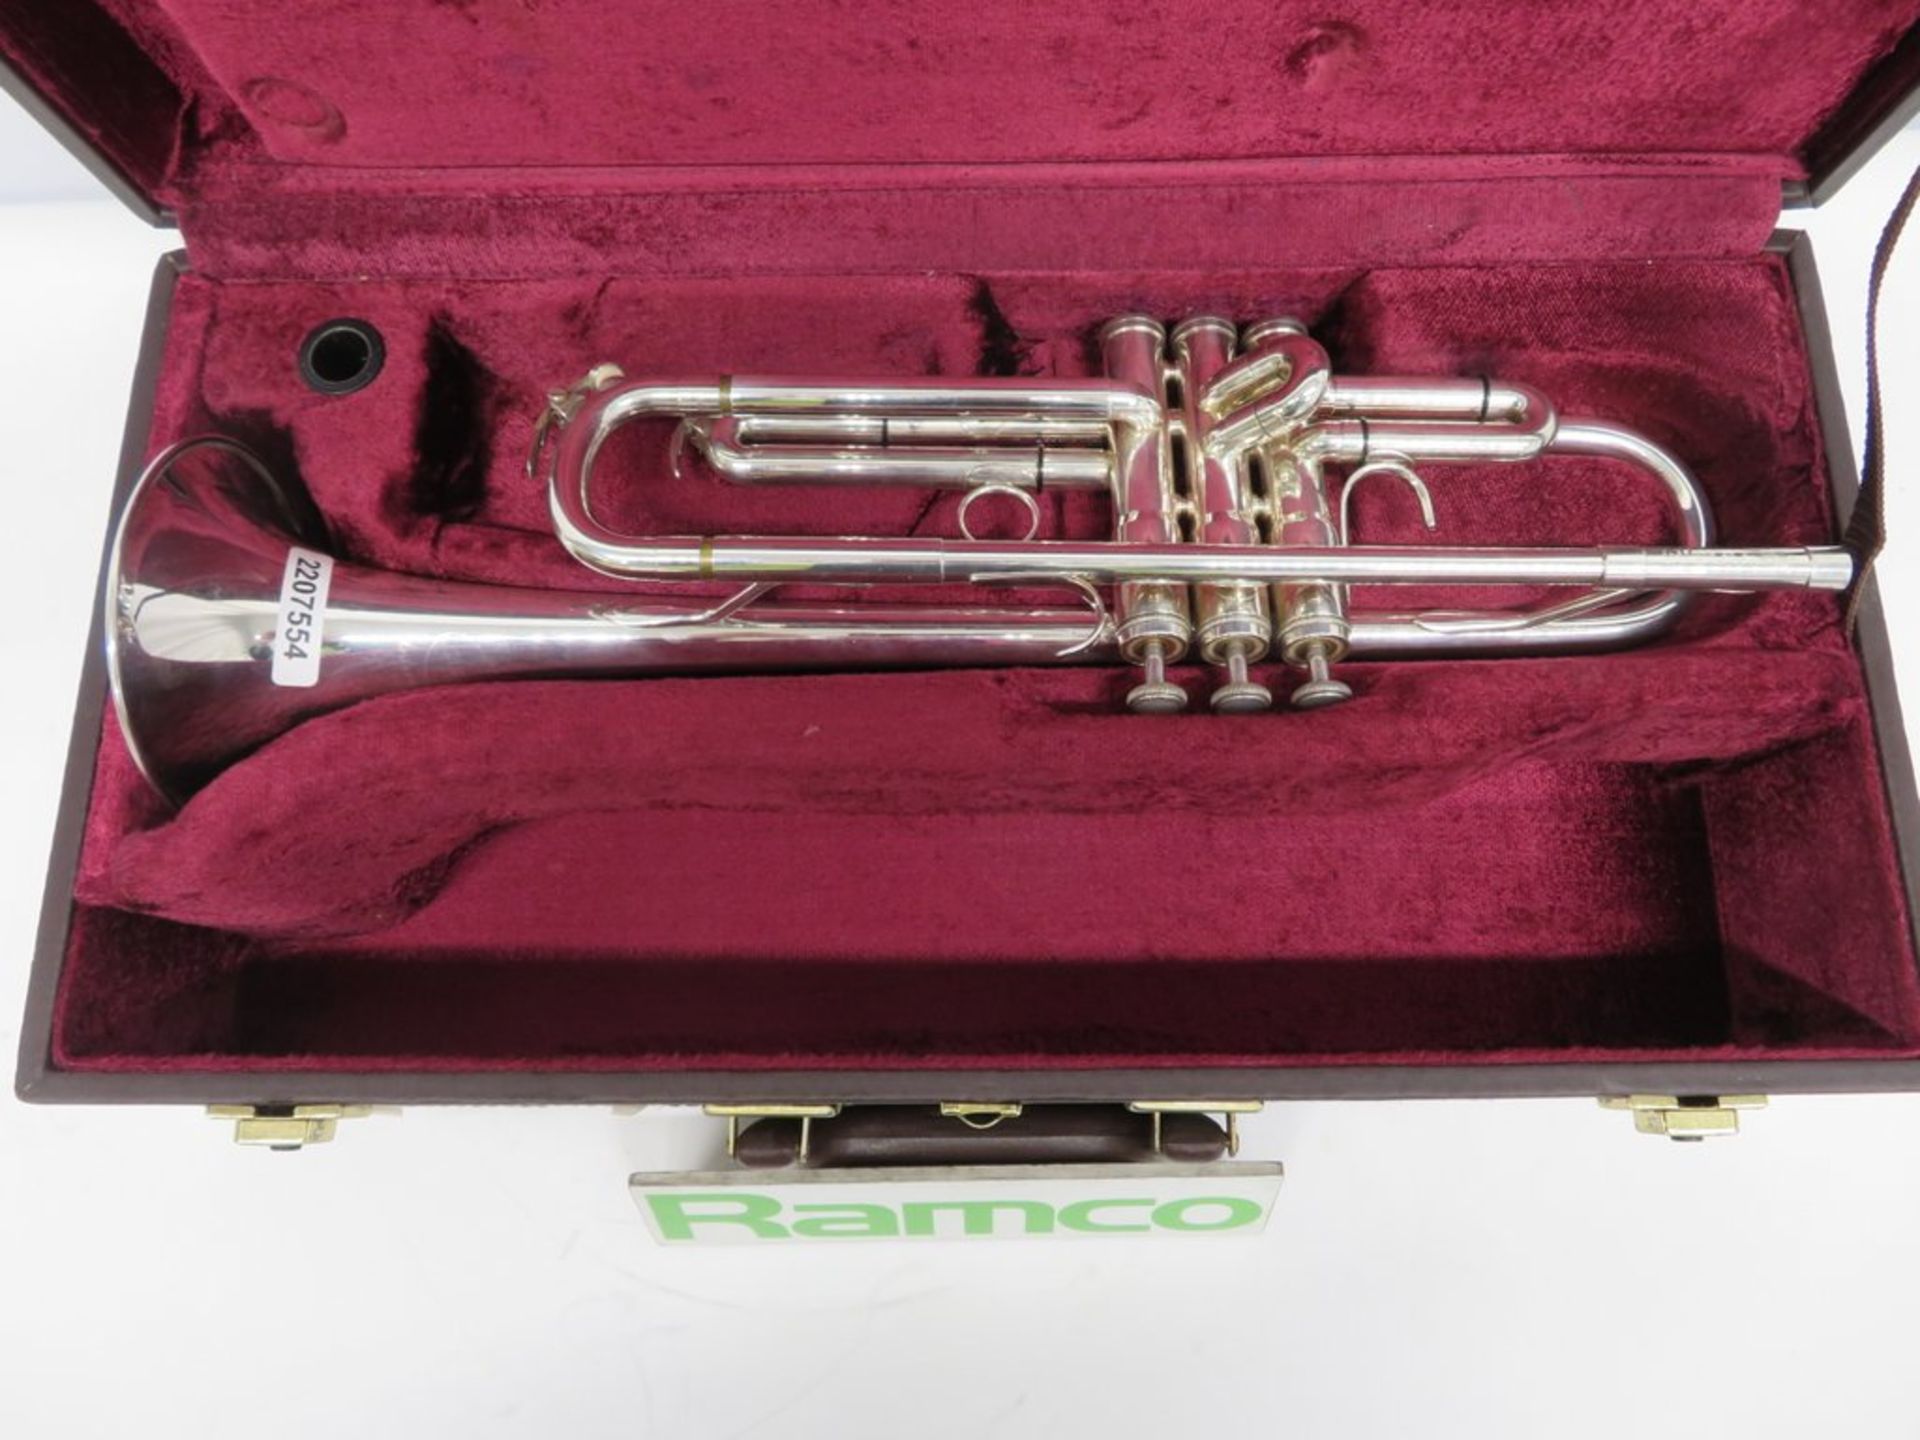 Besson International 713 Trumpet Complete With Case. - Image 2 of 12